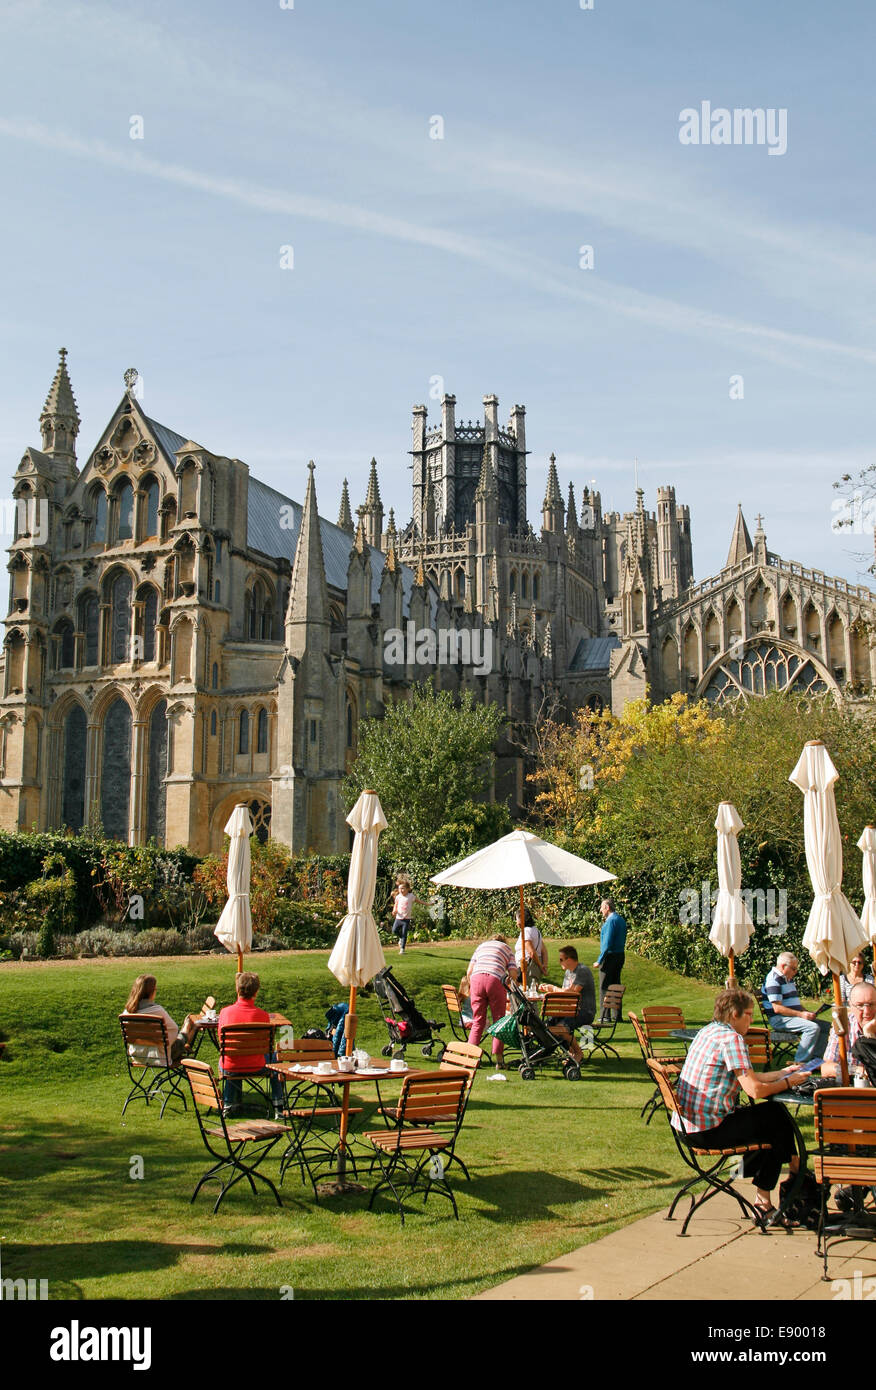 Ely cathedral from restaurant lawns  Ely Cambridgeshire England UK Stock Photo